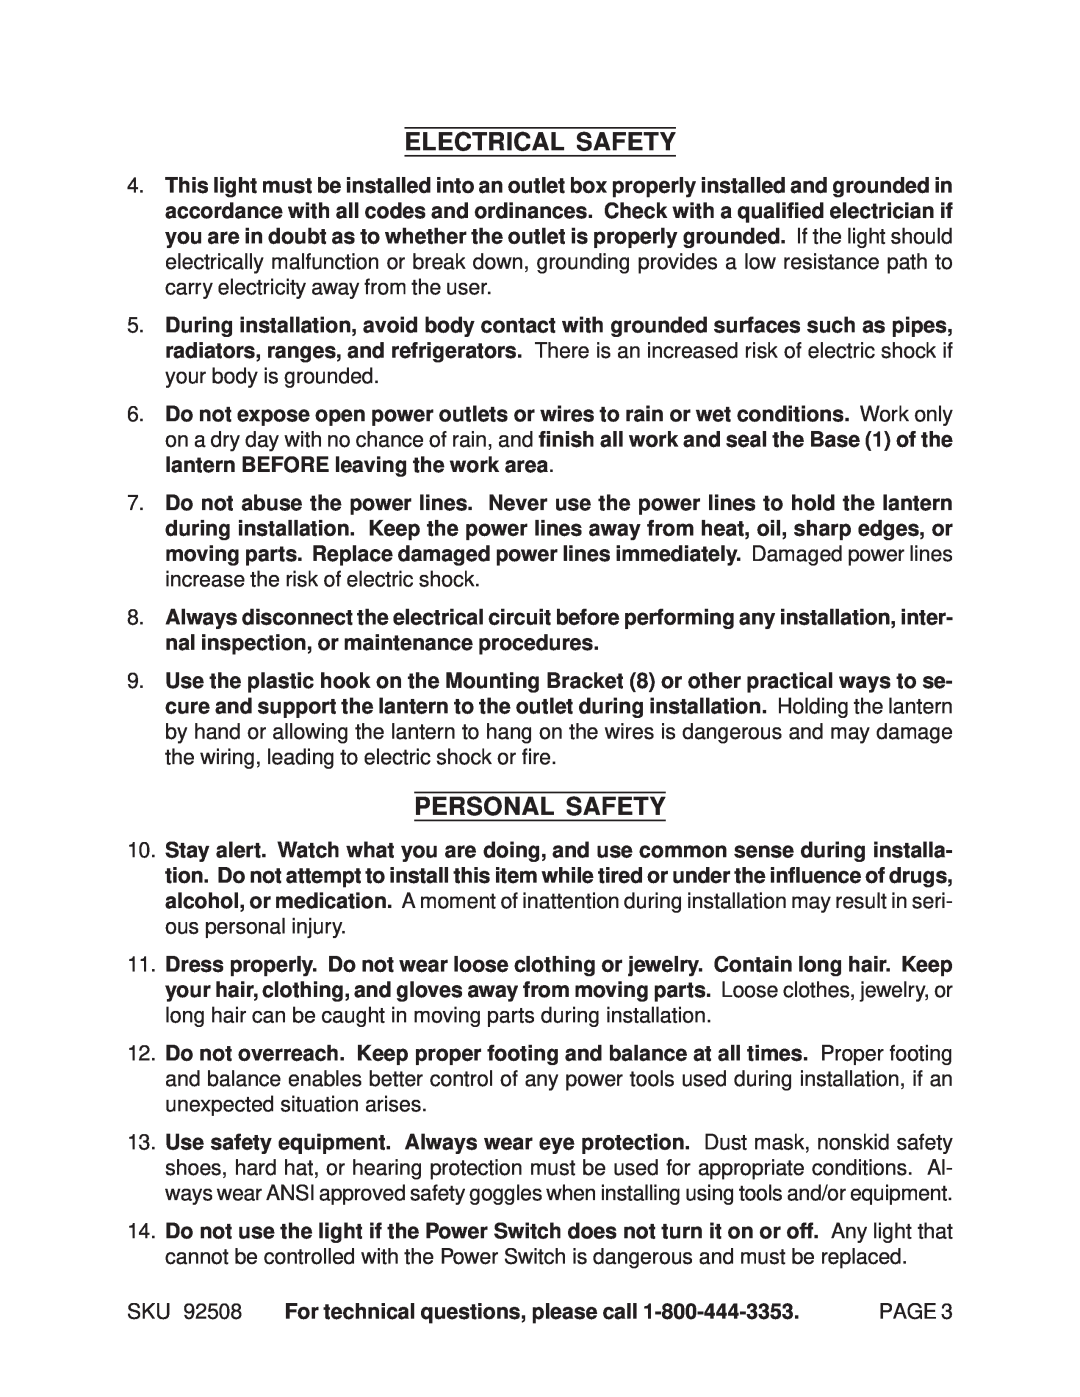 Harbor Freight Tools 92508 manual Electrical Safety, Personal Safety 